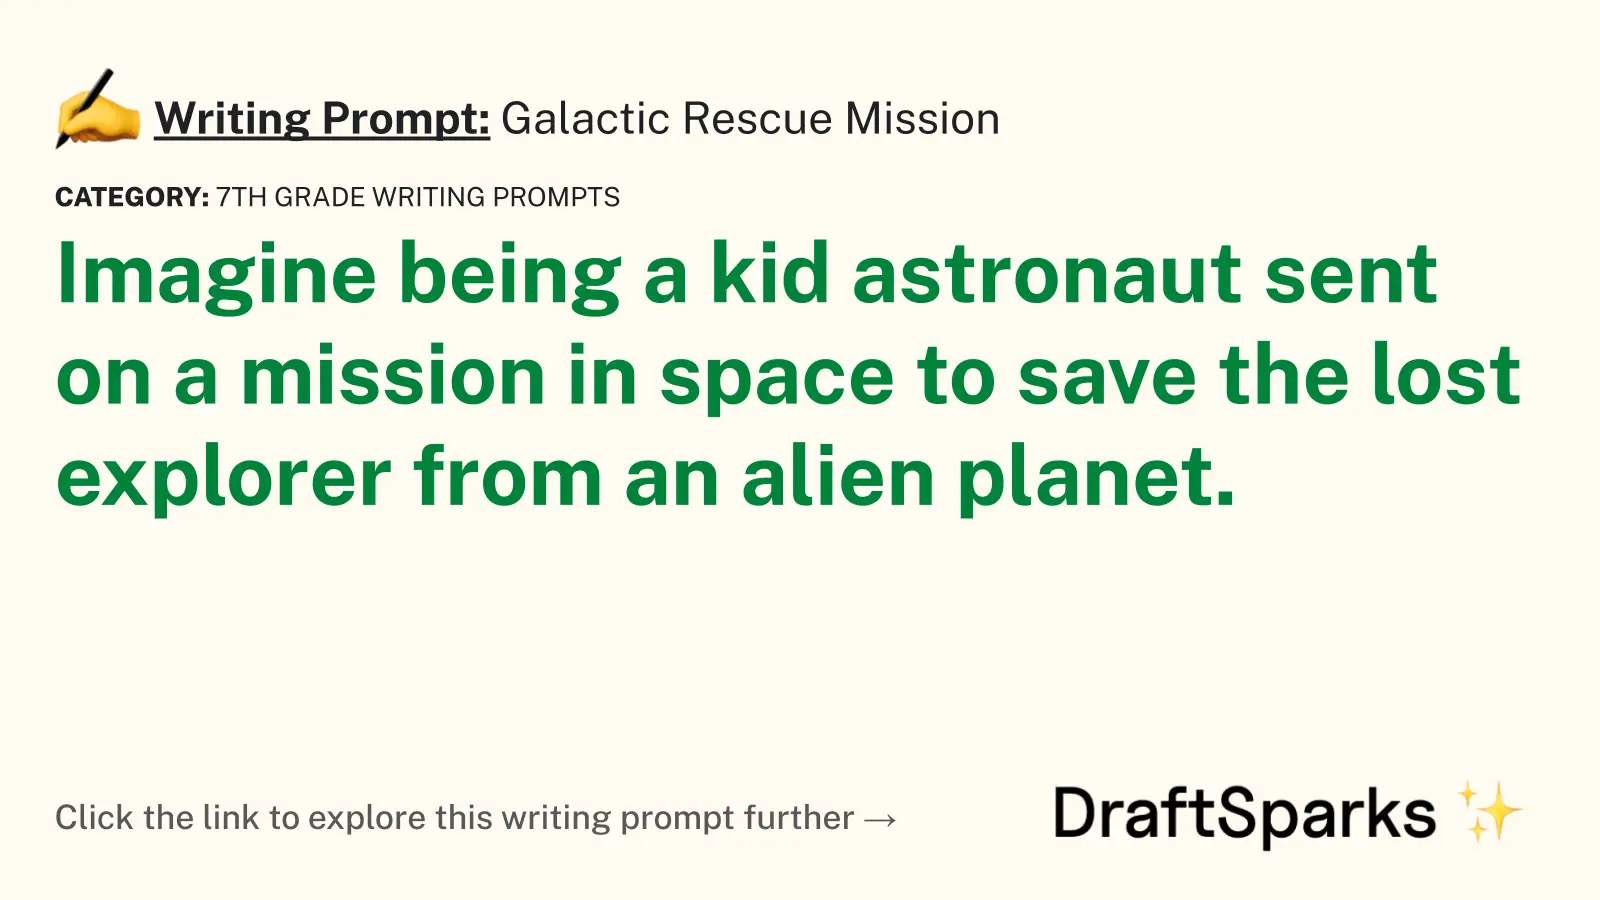 Galactic Rescue Mission